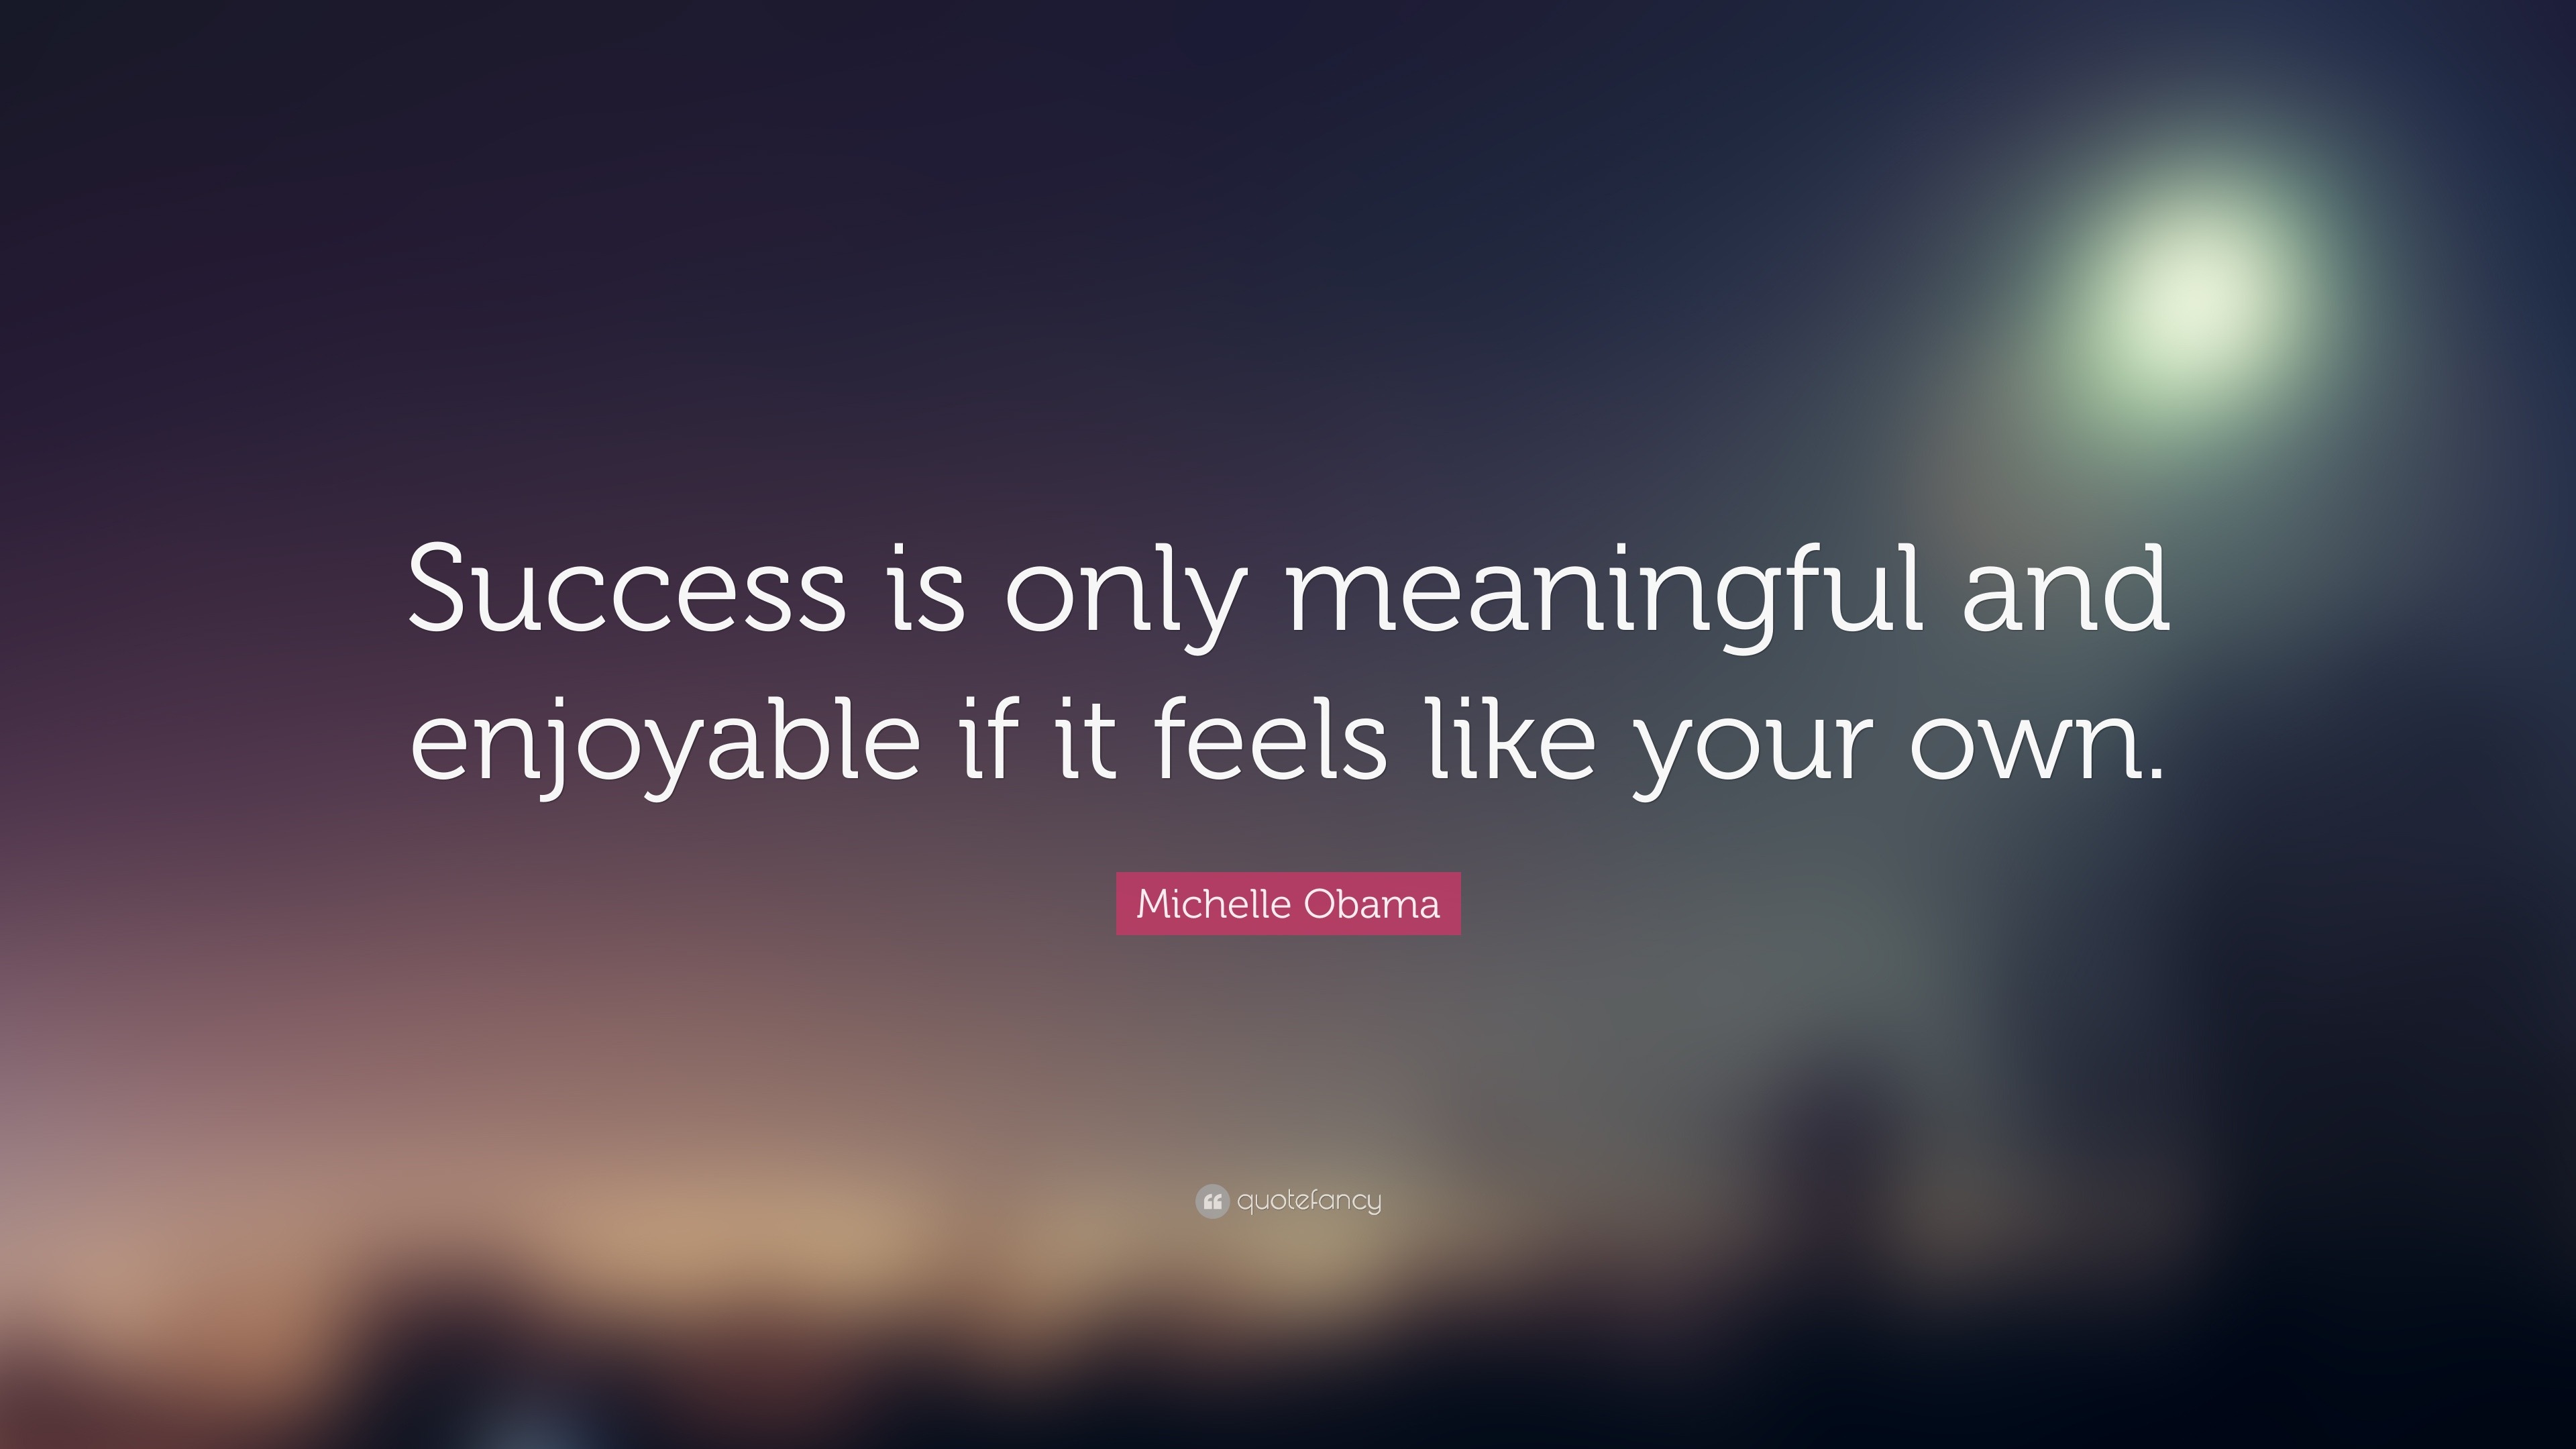 Michelle Obama Quote: “Success is only meaningful and enjoyable if it ...